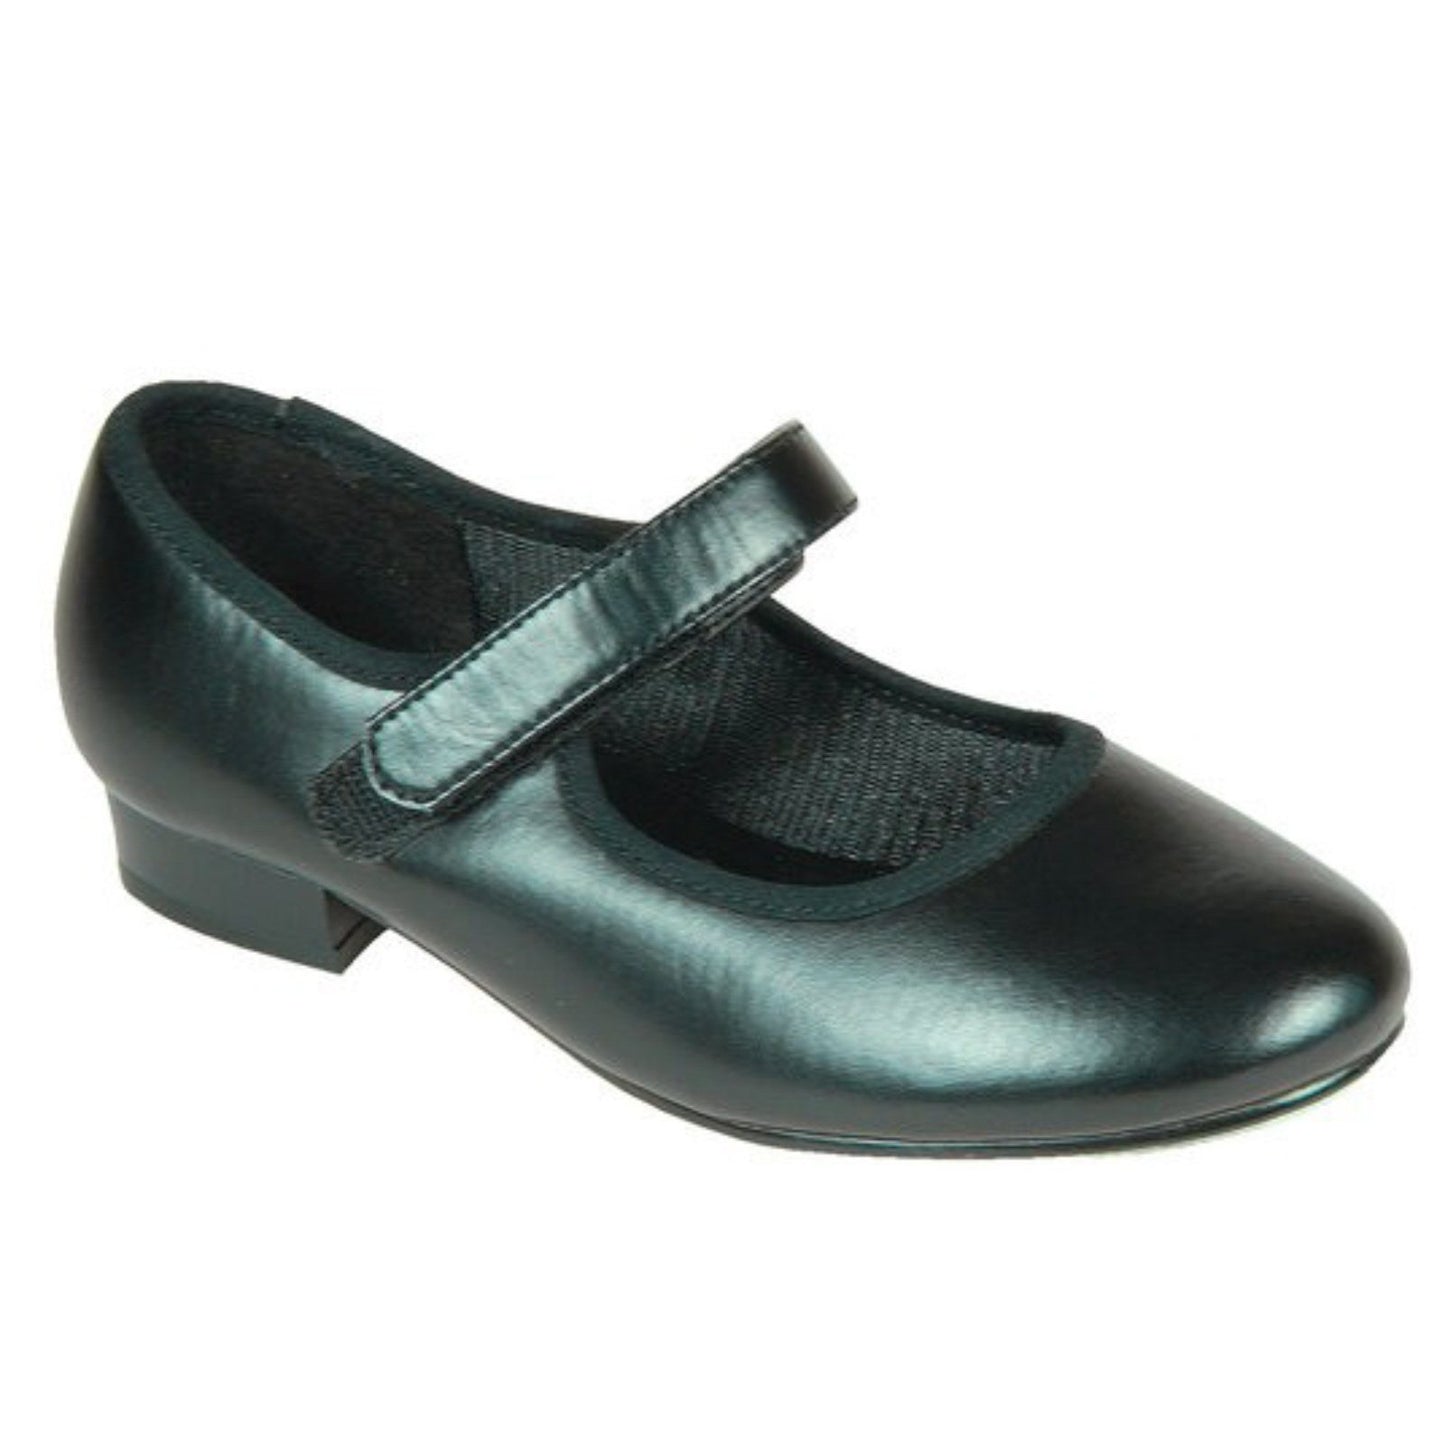 TAPPERS & POINTERS CHILDREN'S LOW HEEL VELCRO TAP SHOES Dance Shoes Tappers and Pointers Black Junior 5 